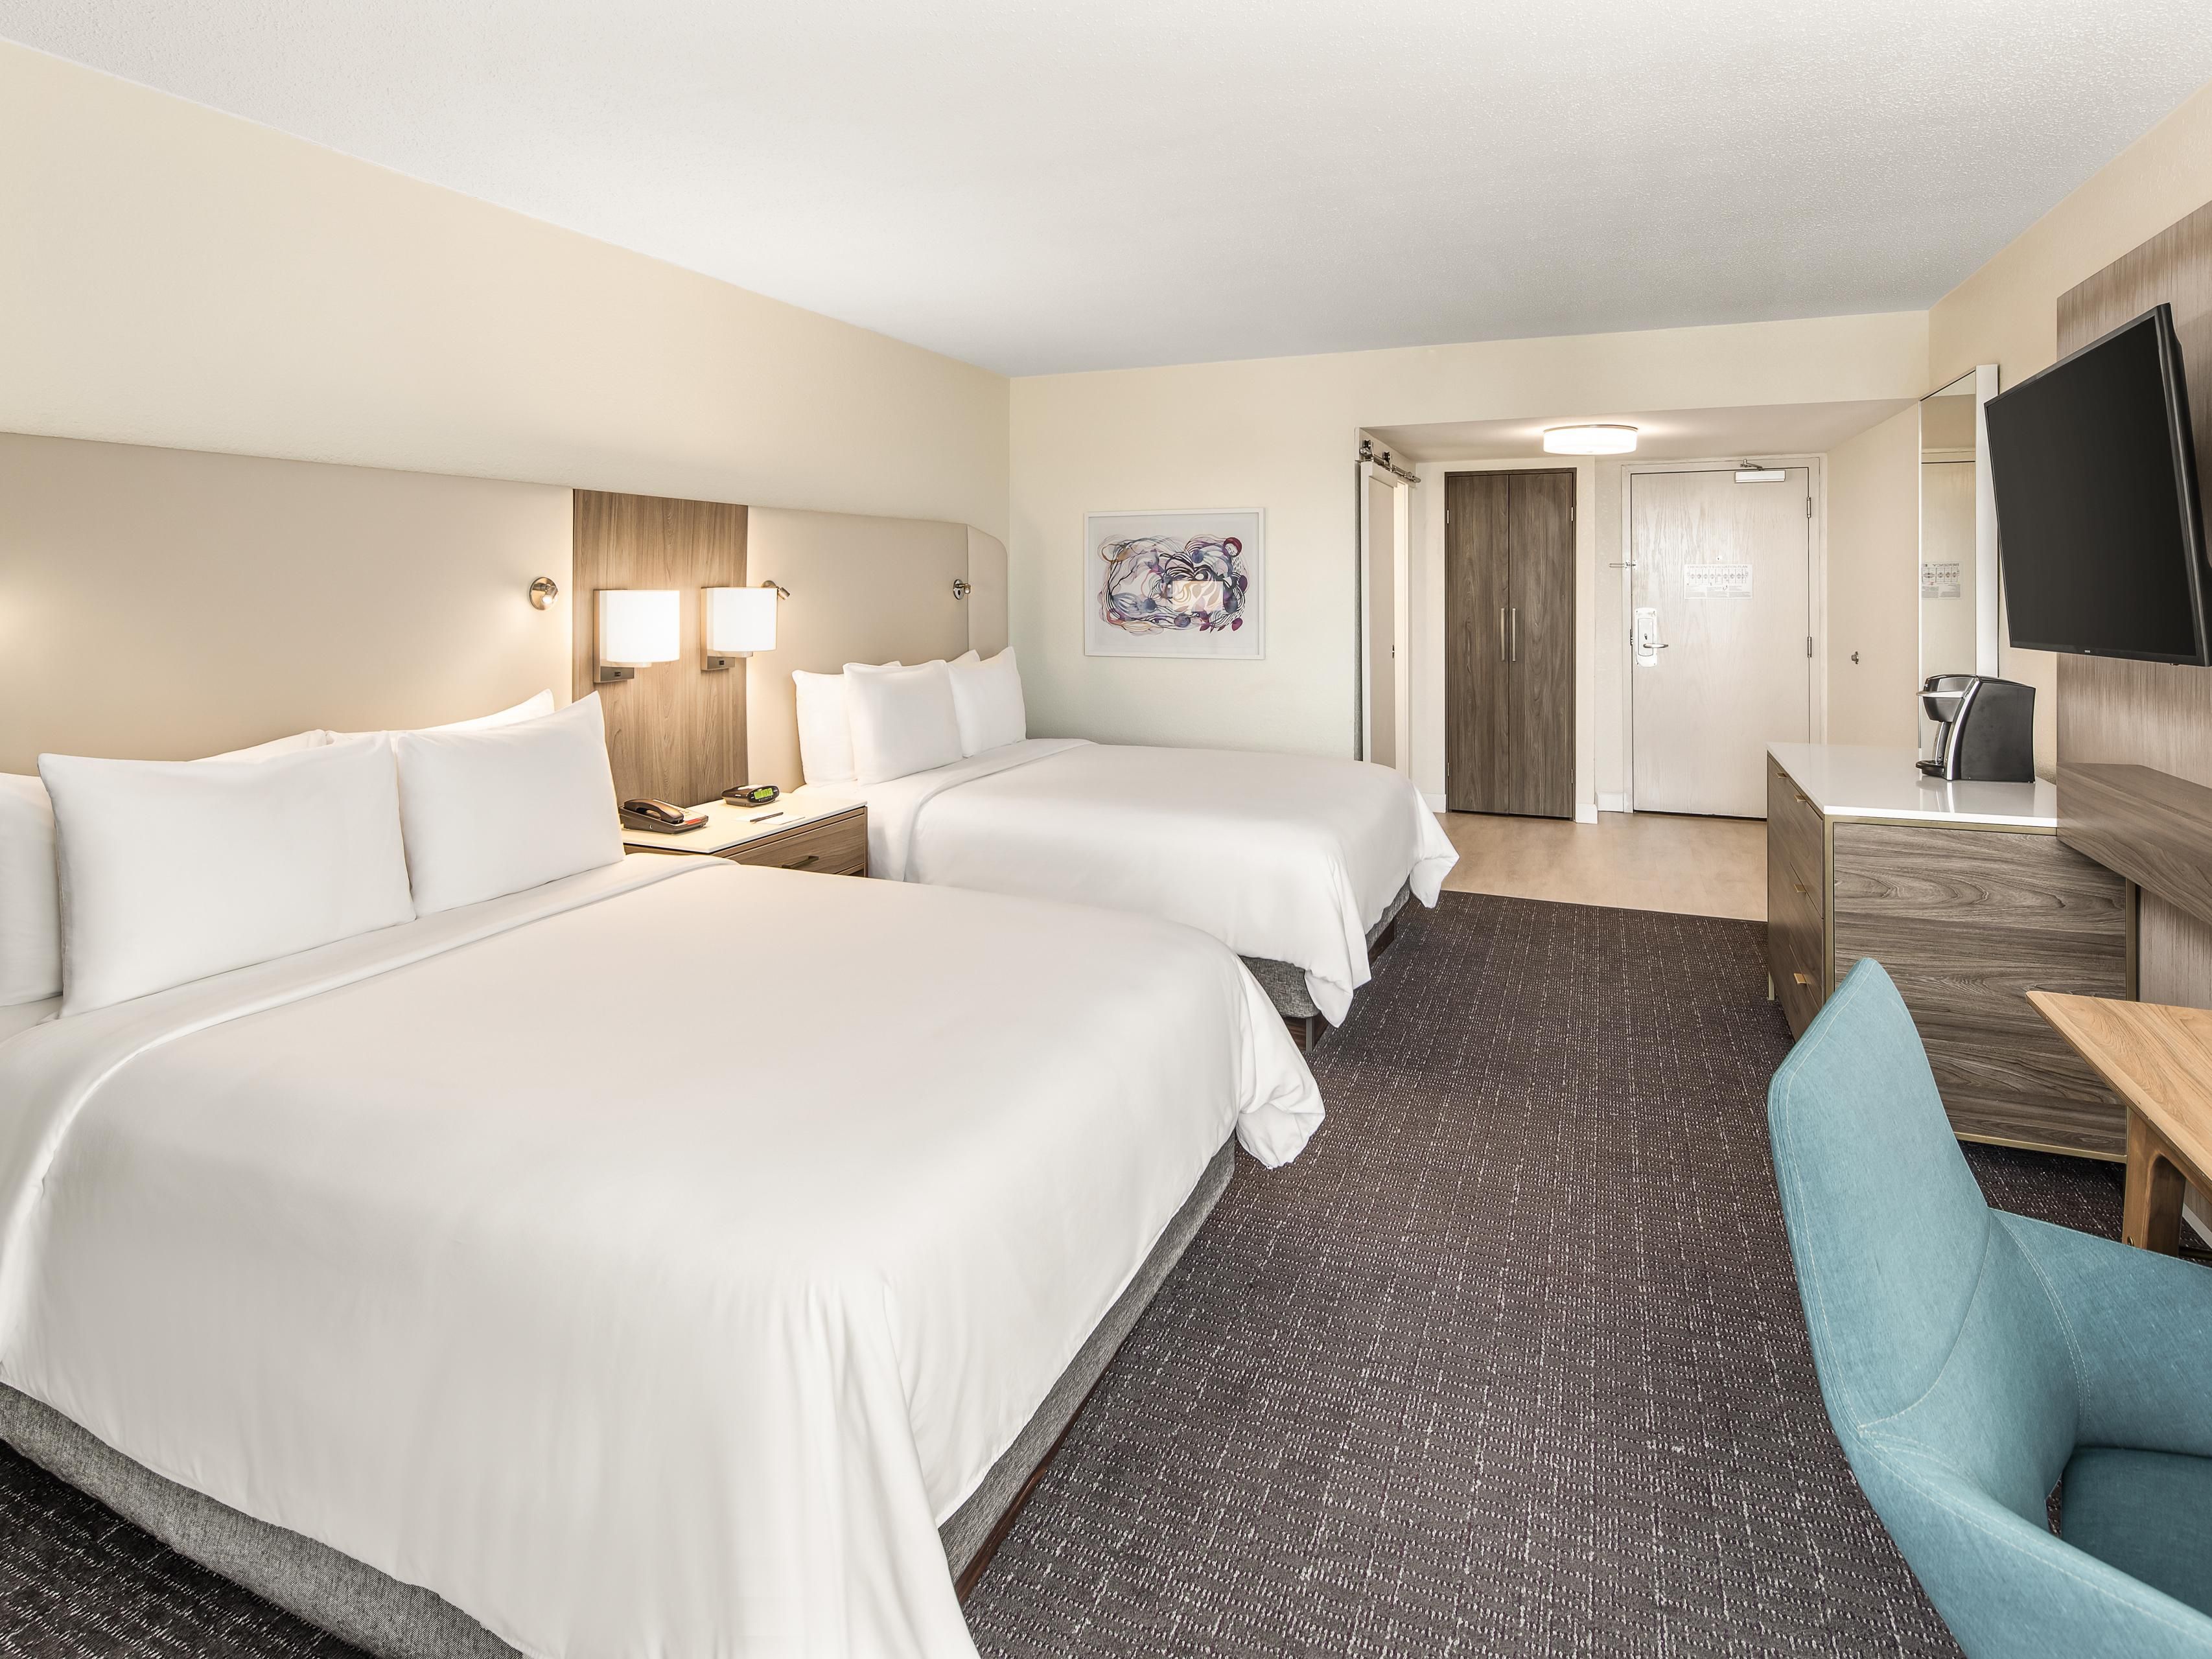 Ease between work and relaxation in our modern and stylish guest rooms with an artful balance of aesthetics and comfort. Our standard rooms feature plush bedding with a cocooning headboard, a dynamic sofa nook, and an expansive workstation where you can relax, recharge, and stay productive. 